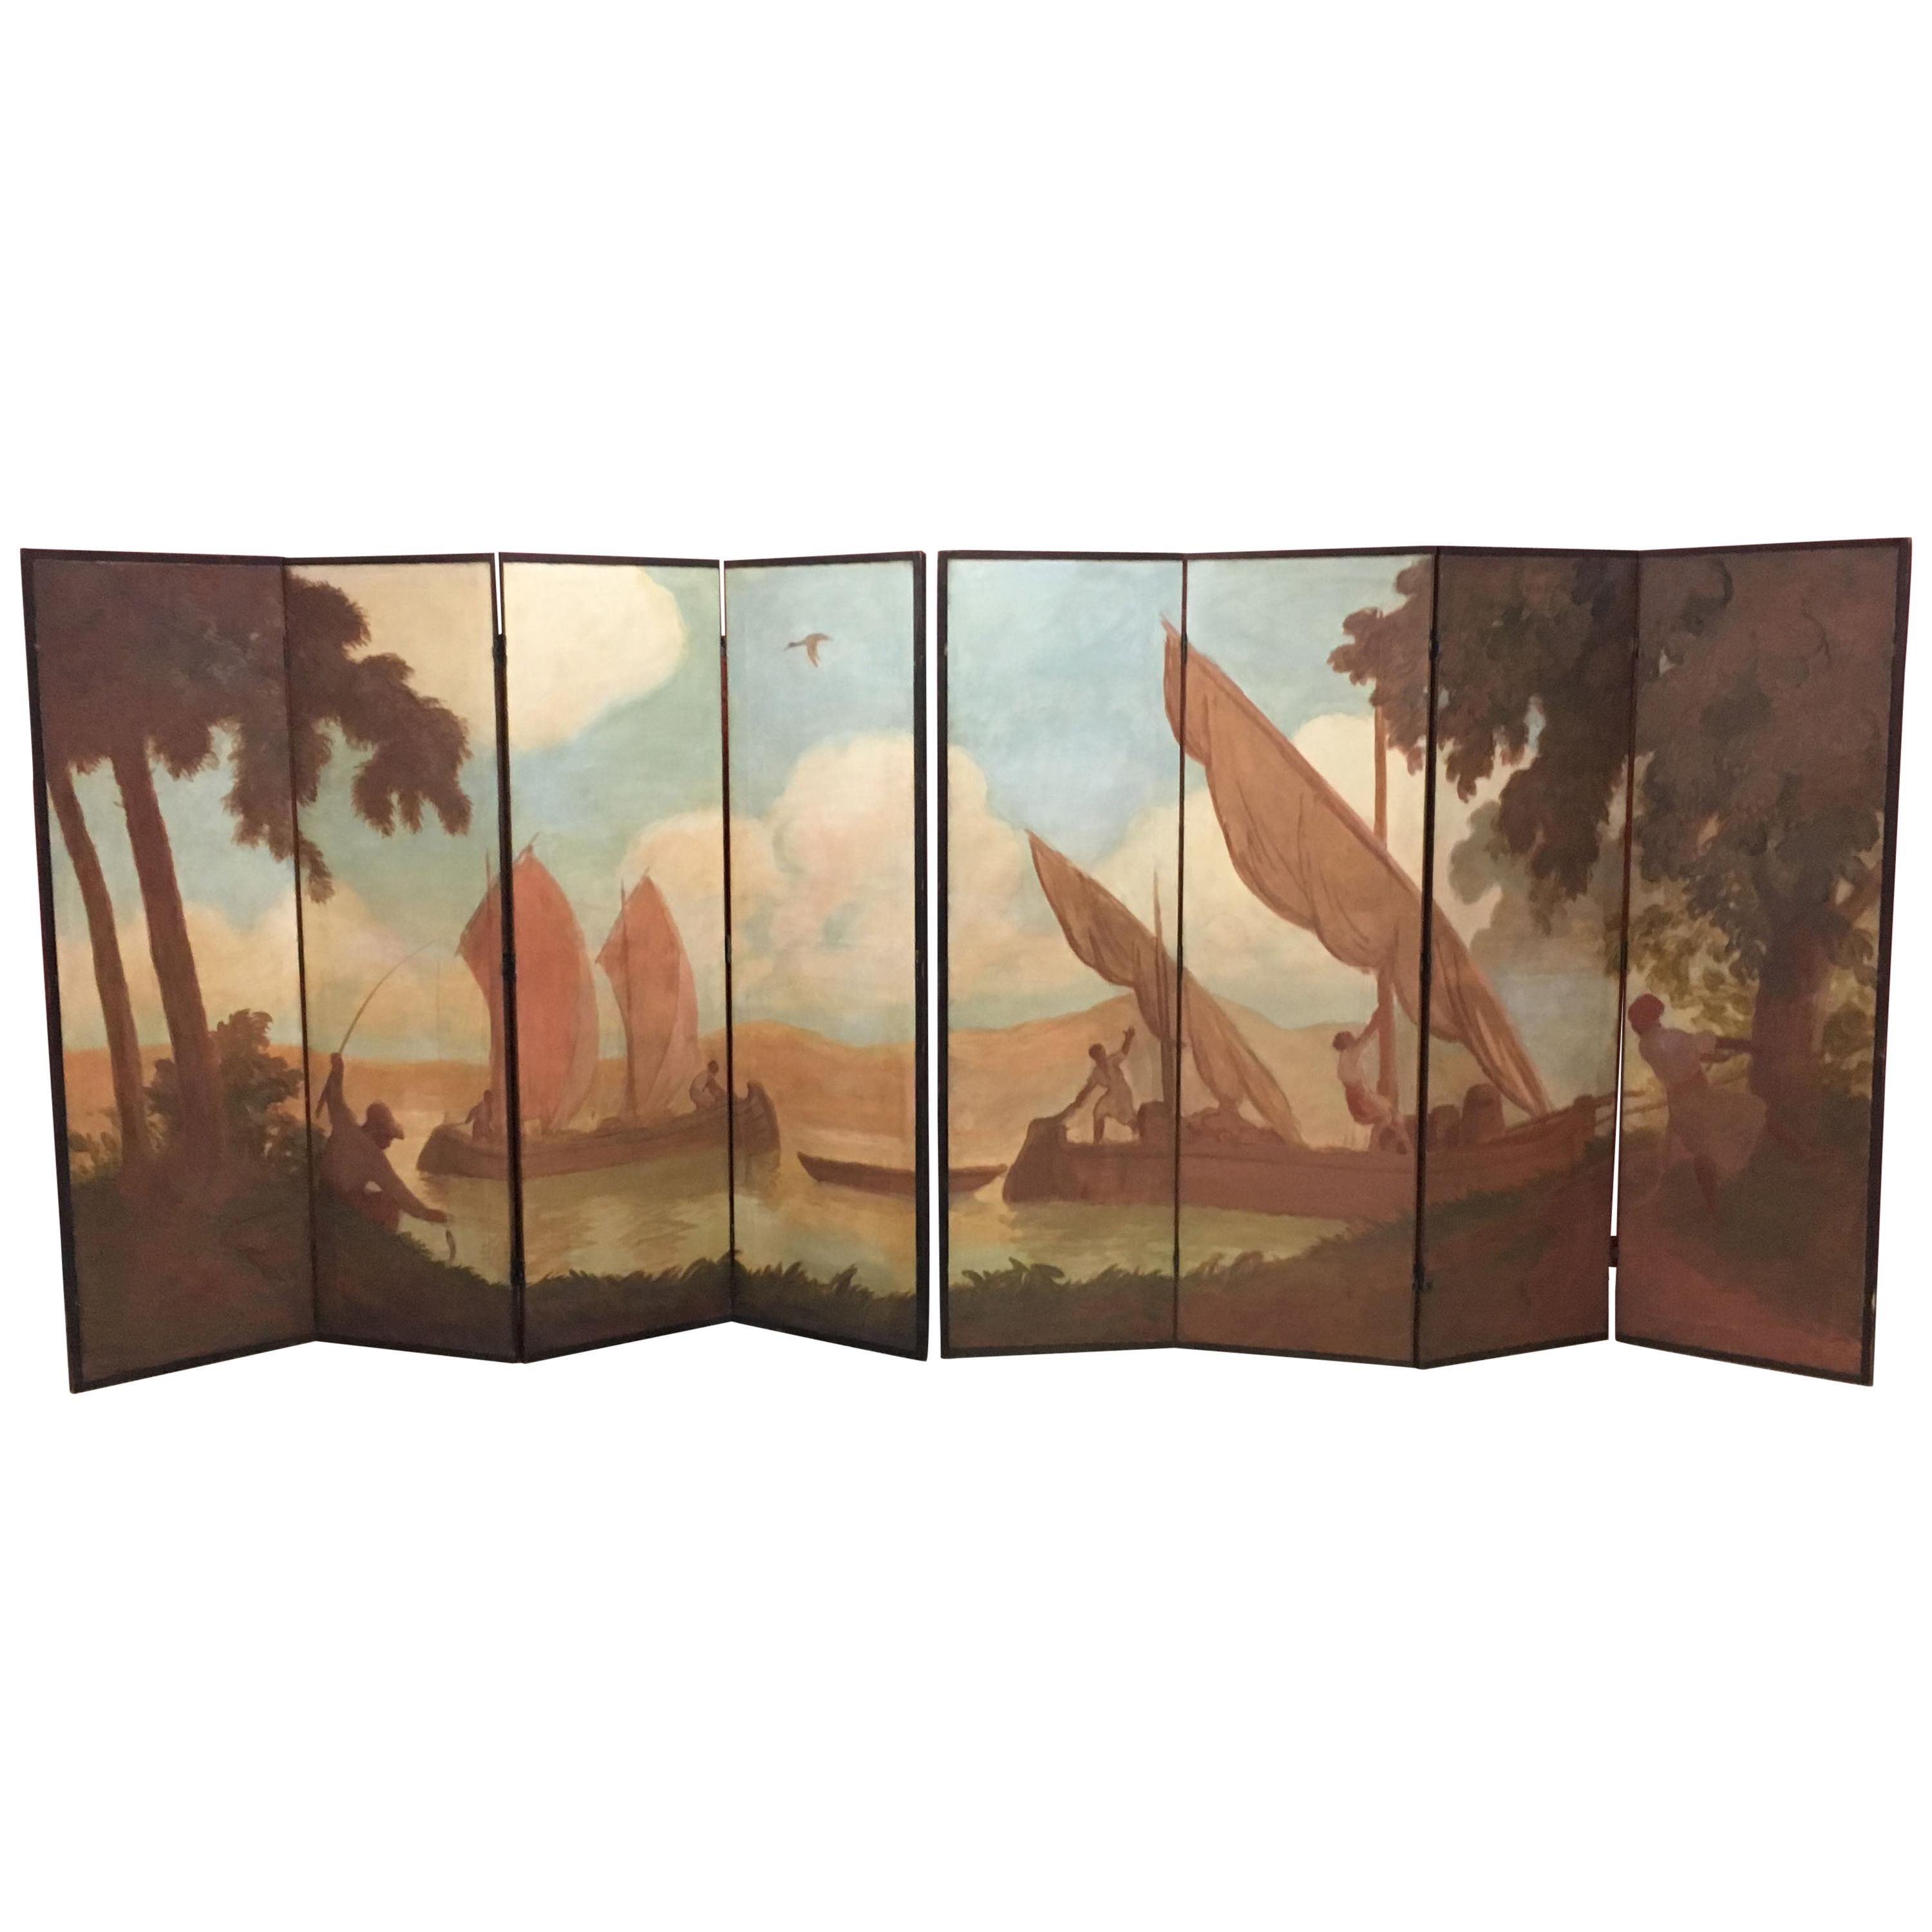 Rare Folding Screen Period 1900, Composed of Two Elements, circa 1900